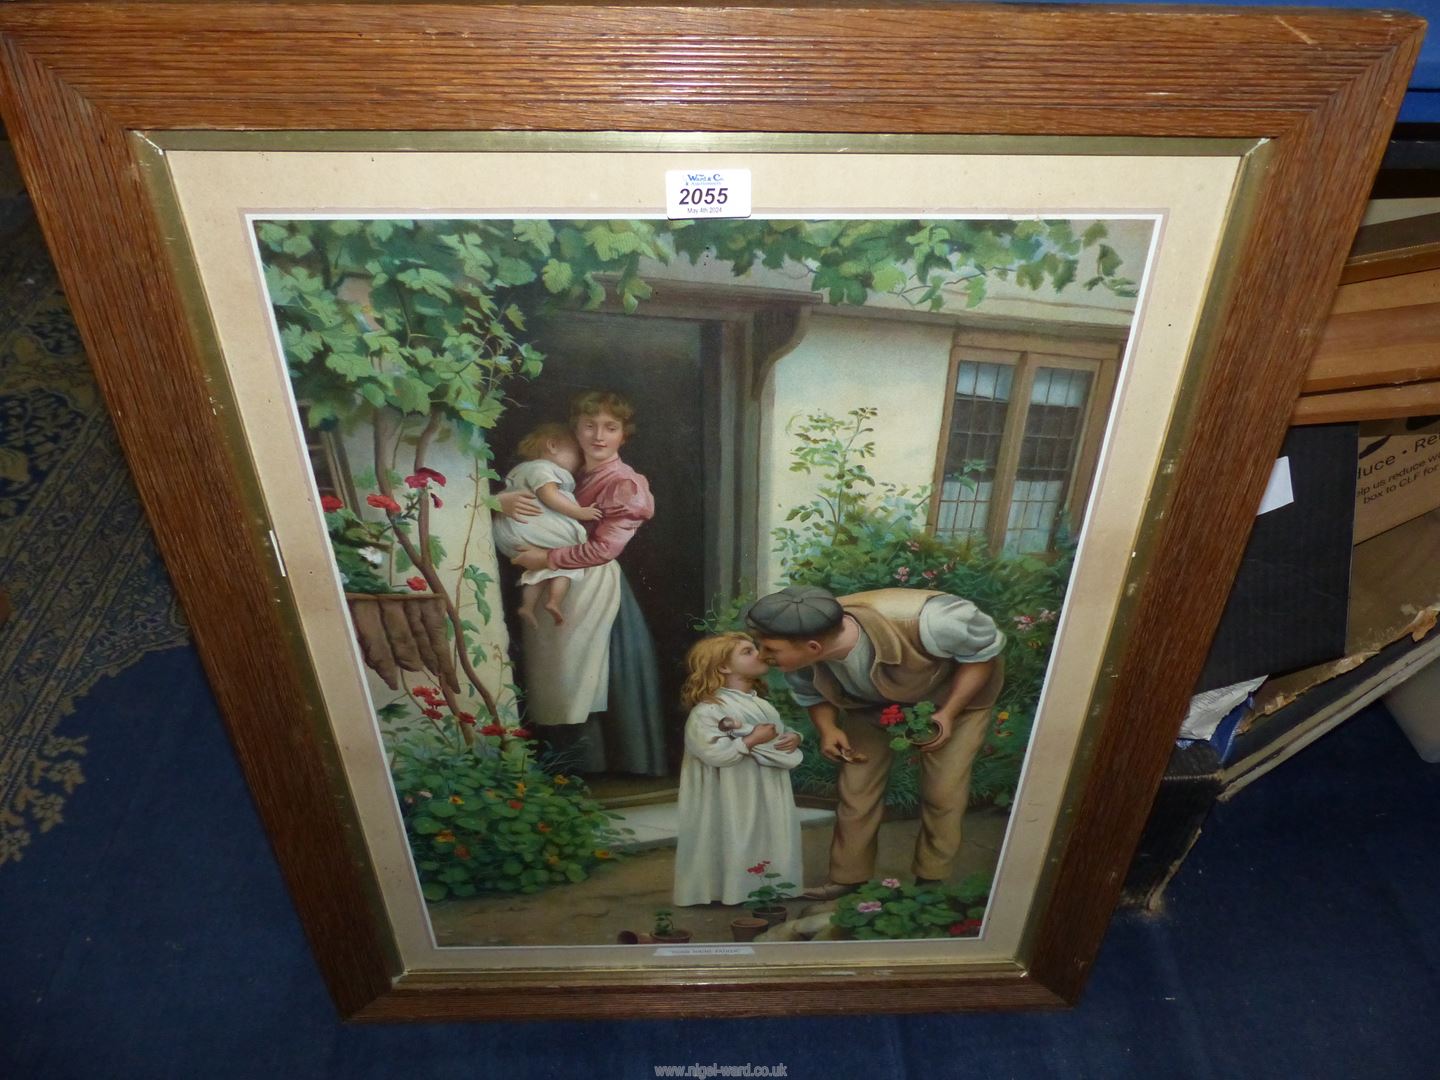 A wooden framed Pears Style print "Goodnight Father", no Visible Signature.